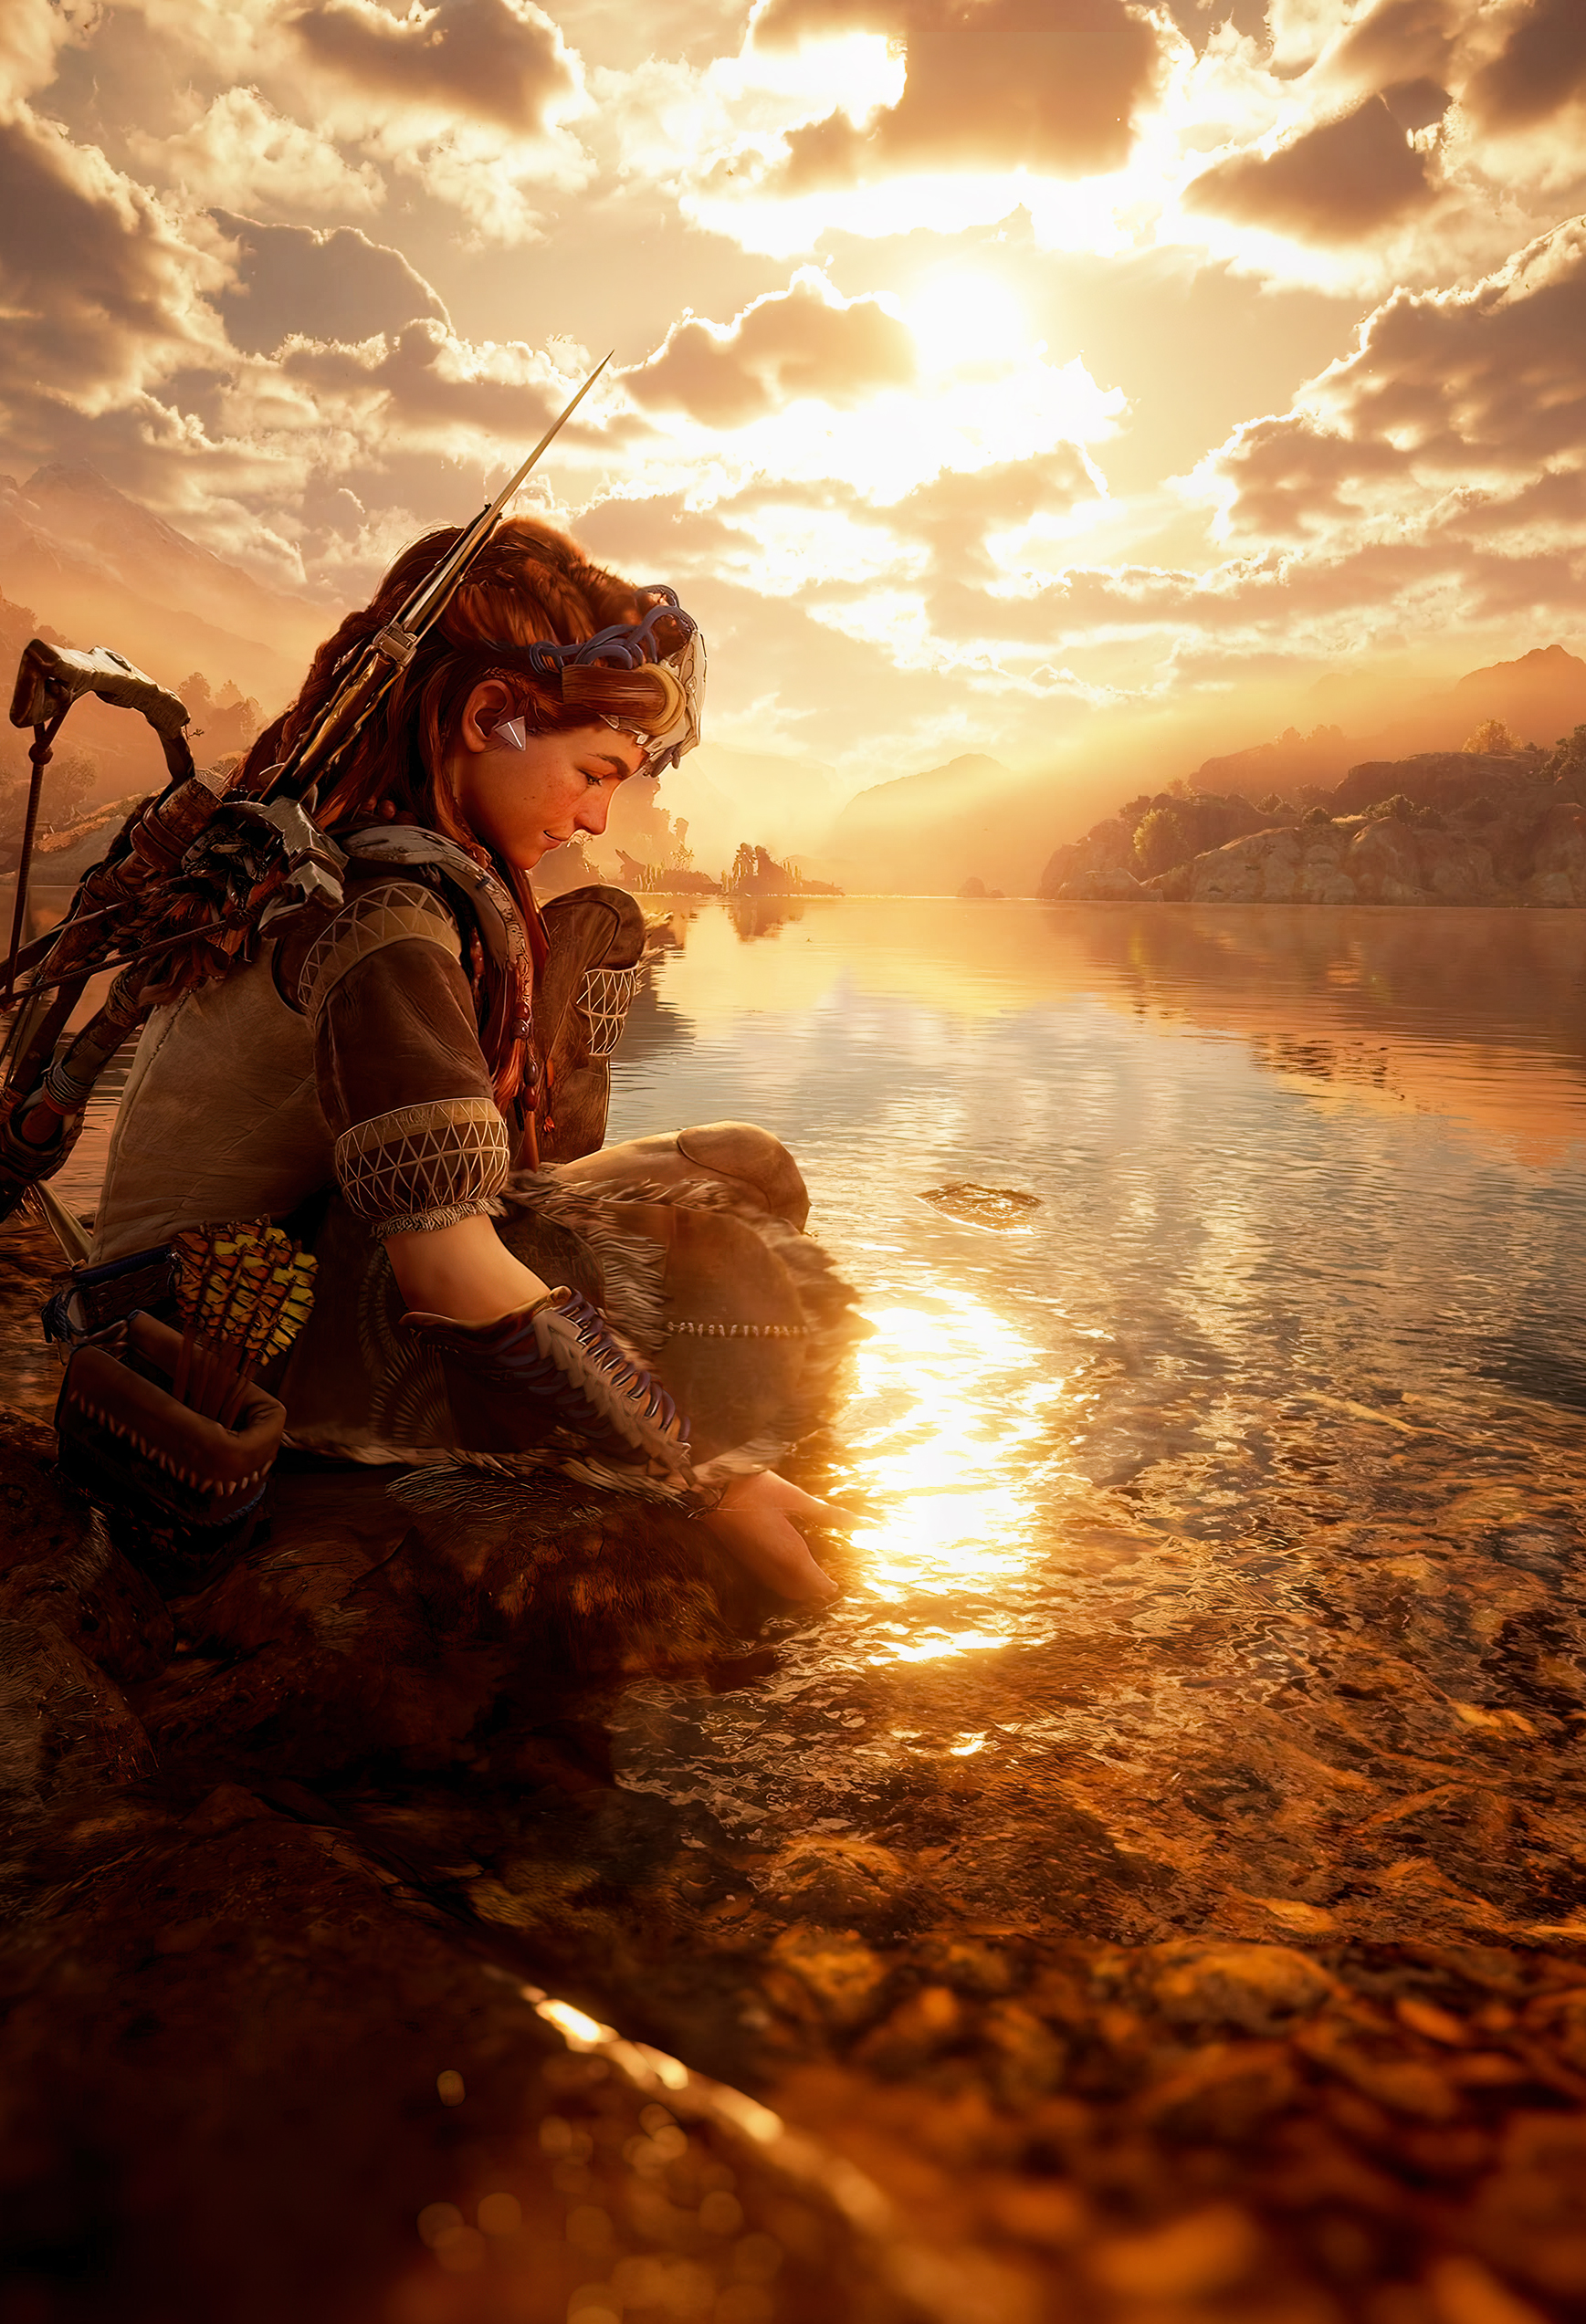 Aloy fetching water